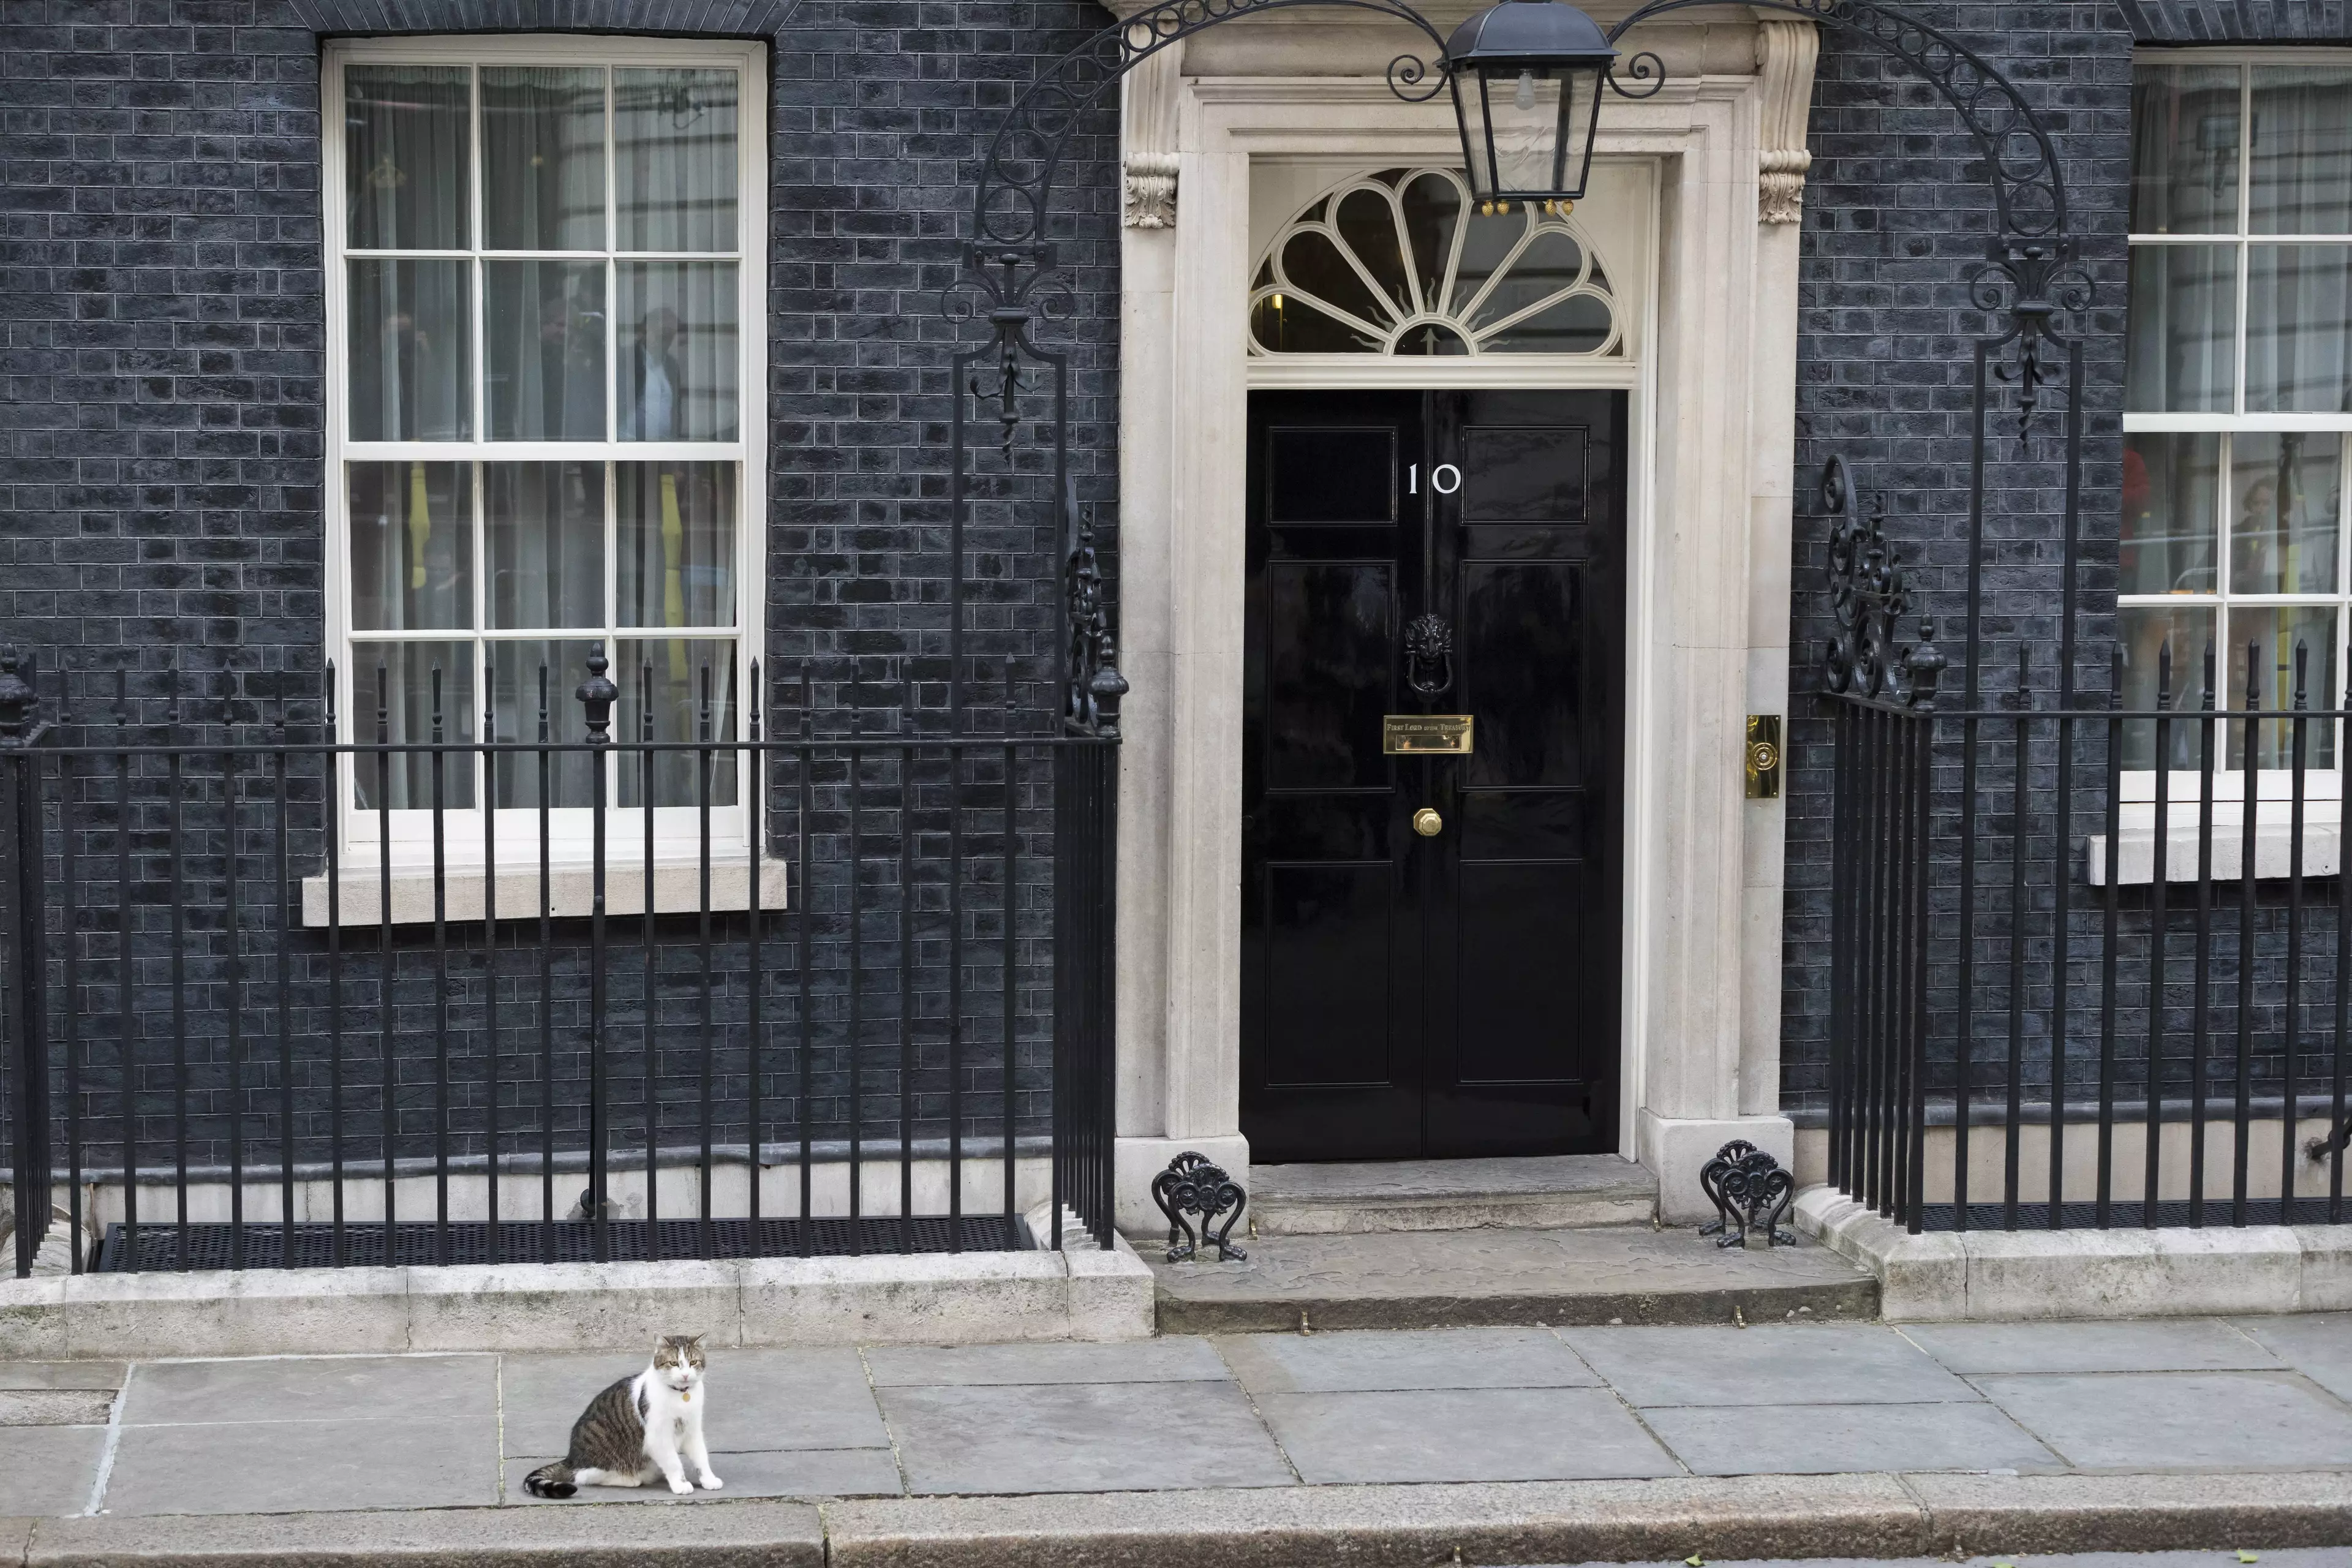 Who gets to go to Number 10?